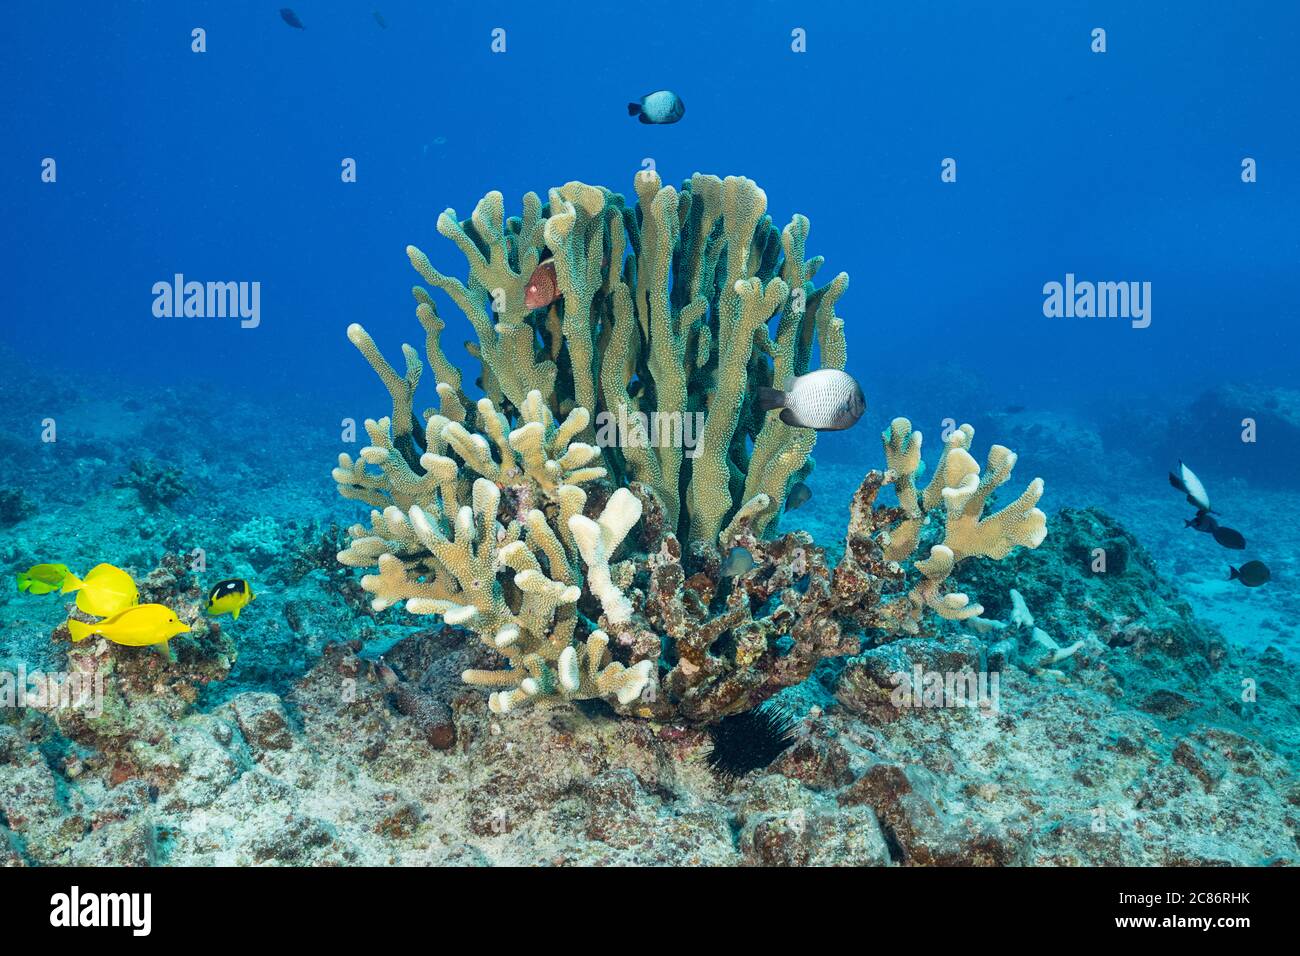 a blackside hawkfish peers out from between the healthy portion of the branches of an antler coral showing 4 stages of bleaching & dying, Kona, Hawaii Stock Photo